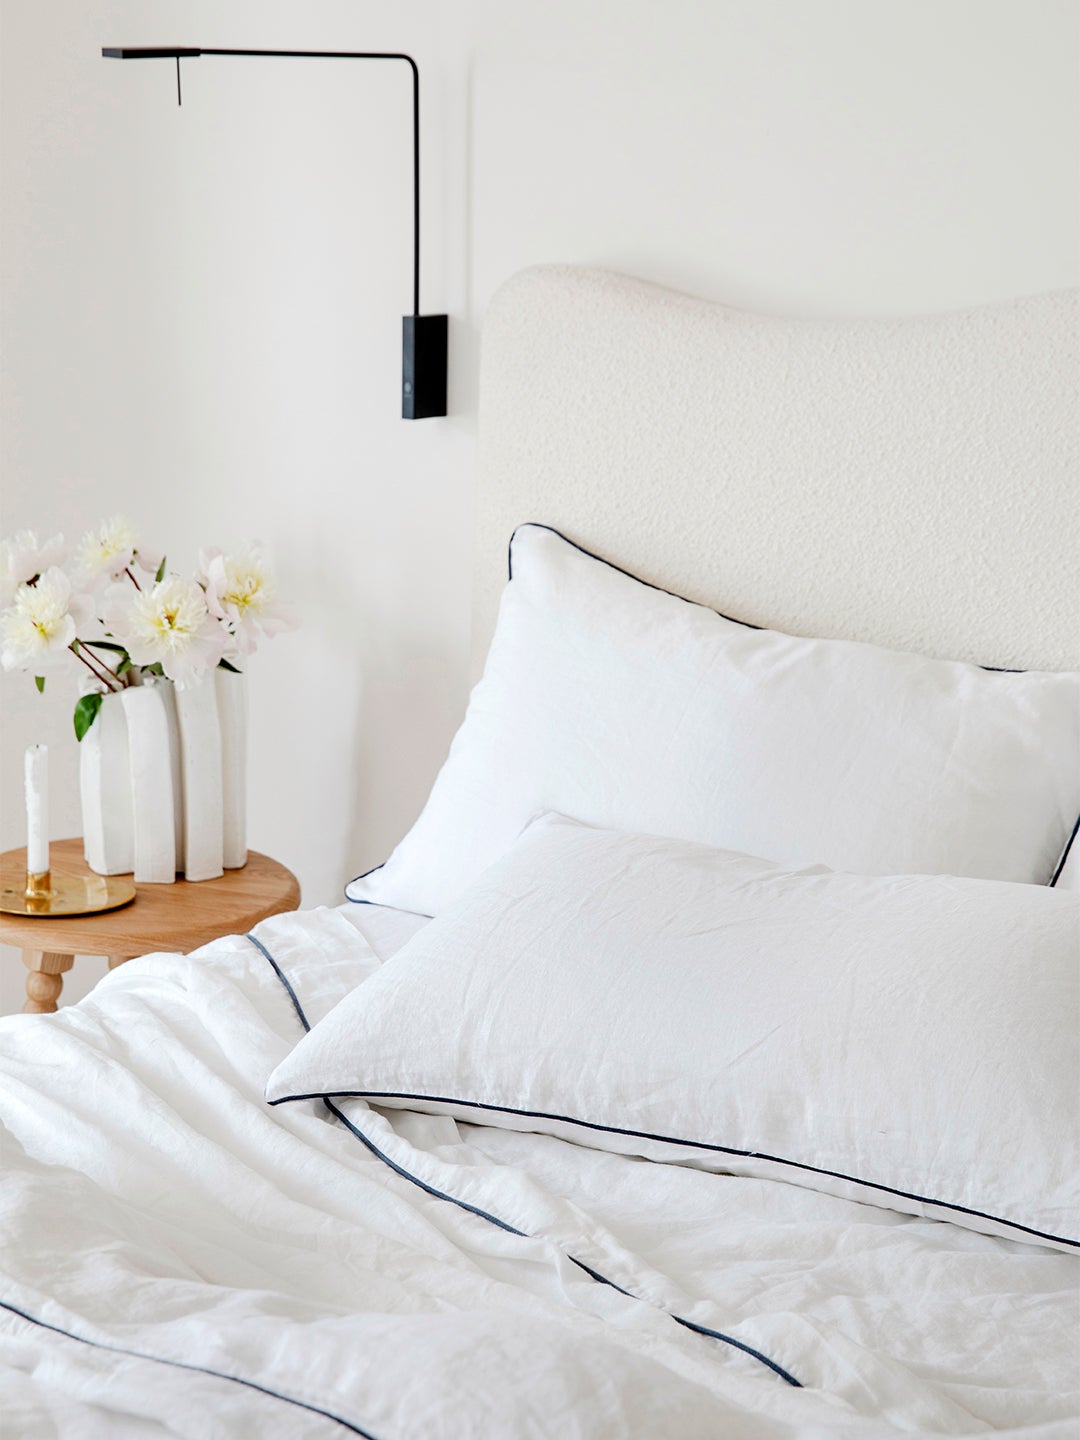 A Bedding Enthusiast’s Review of the Softest Linen Sheets She’s Ever Slept On